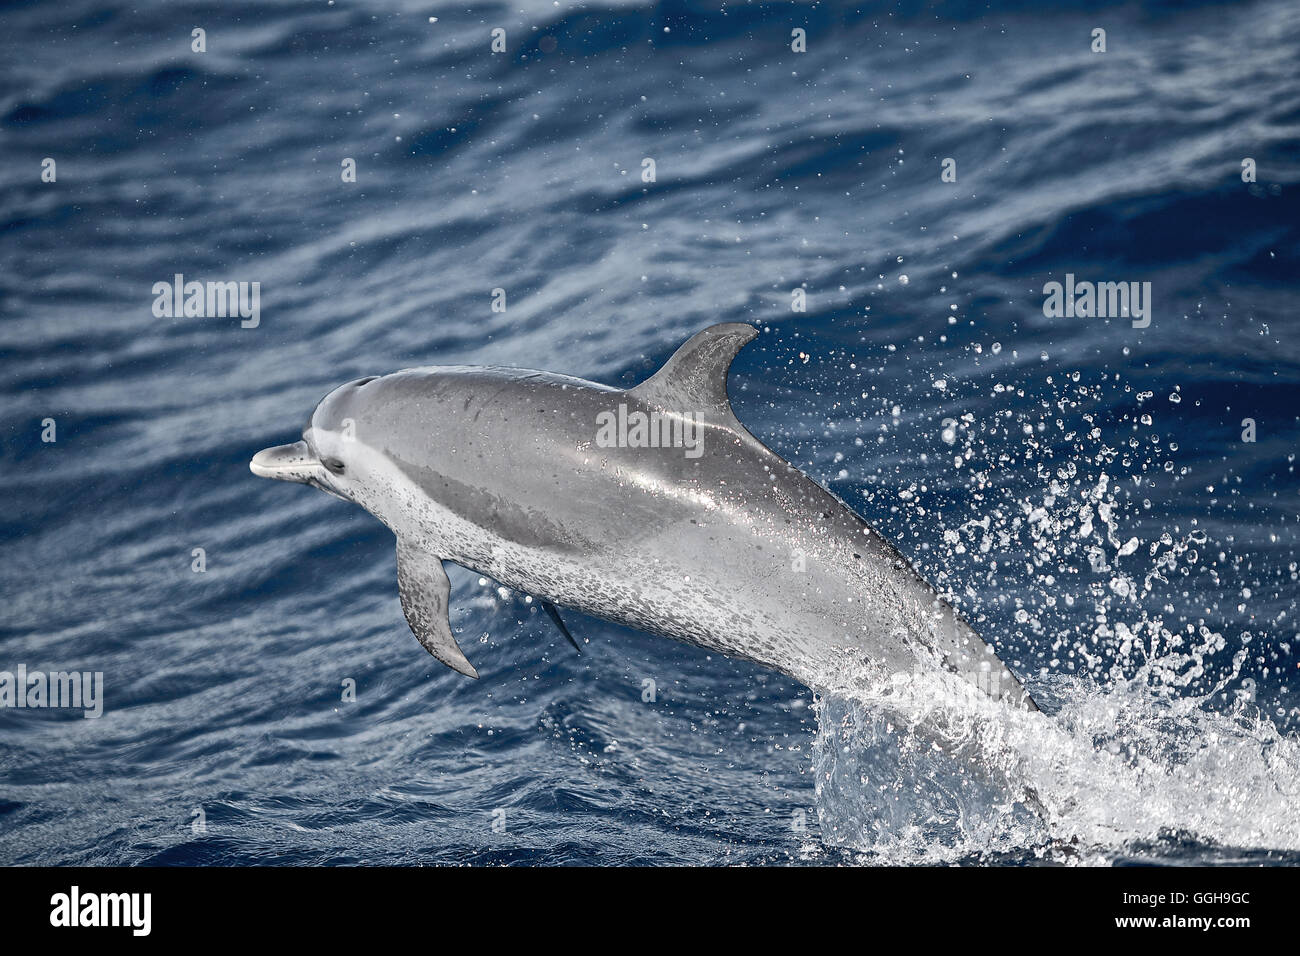 Jumping dolphin, Dominica, Lesser Antilles, Caribbean Stock Photo